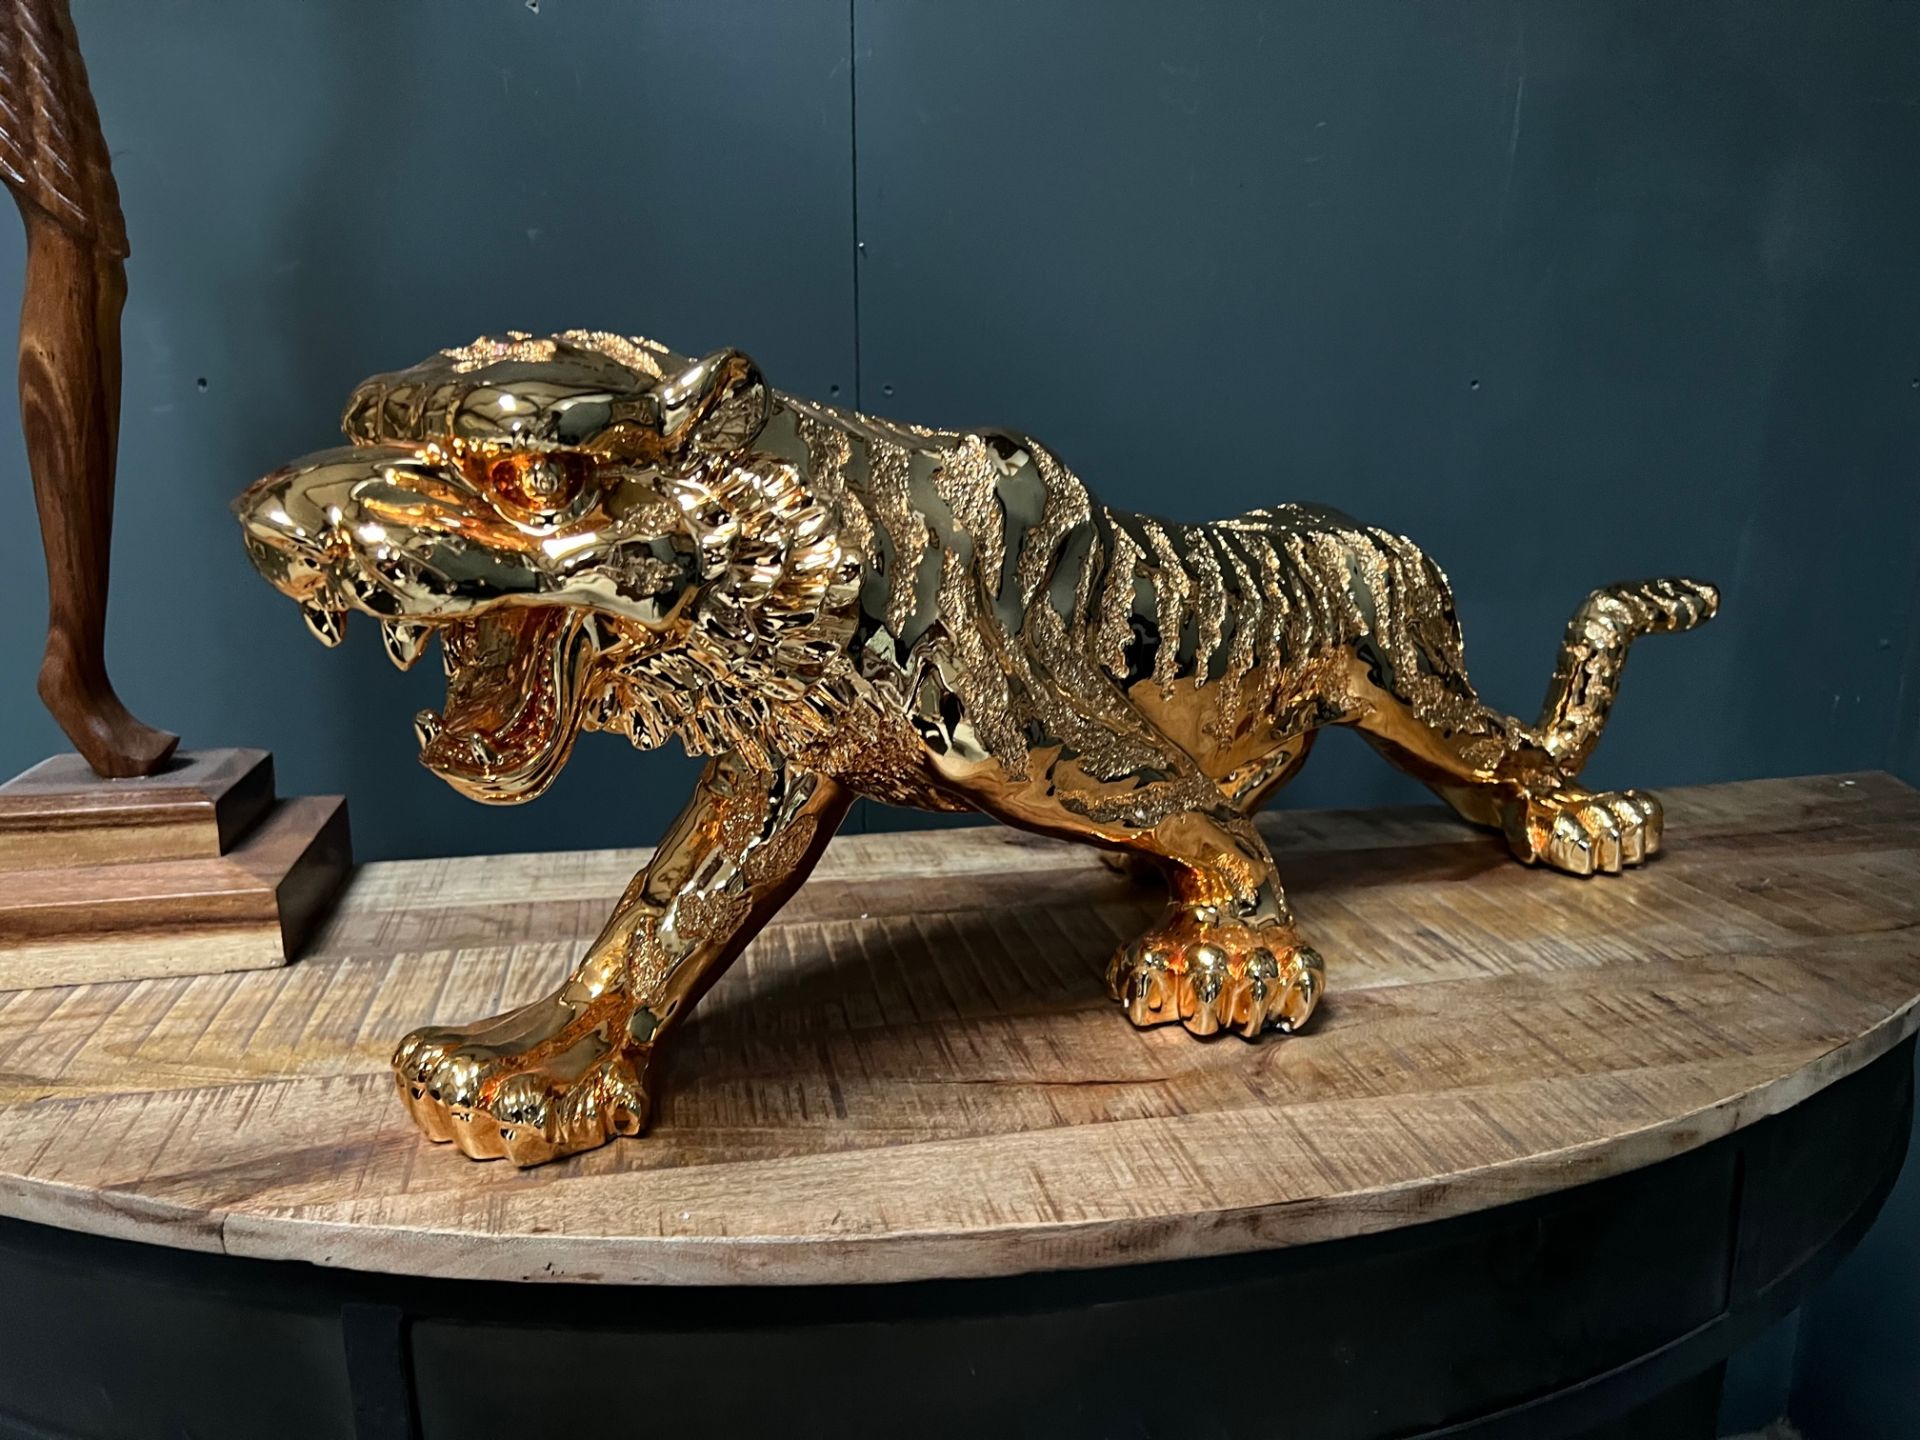 New Boxed Gold Resin Tiger Statue - Image 3 of 7